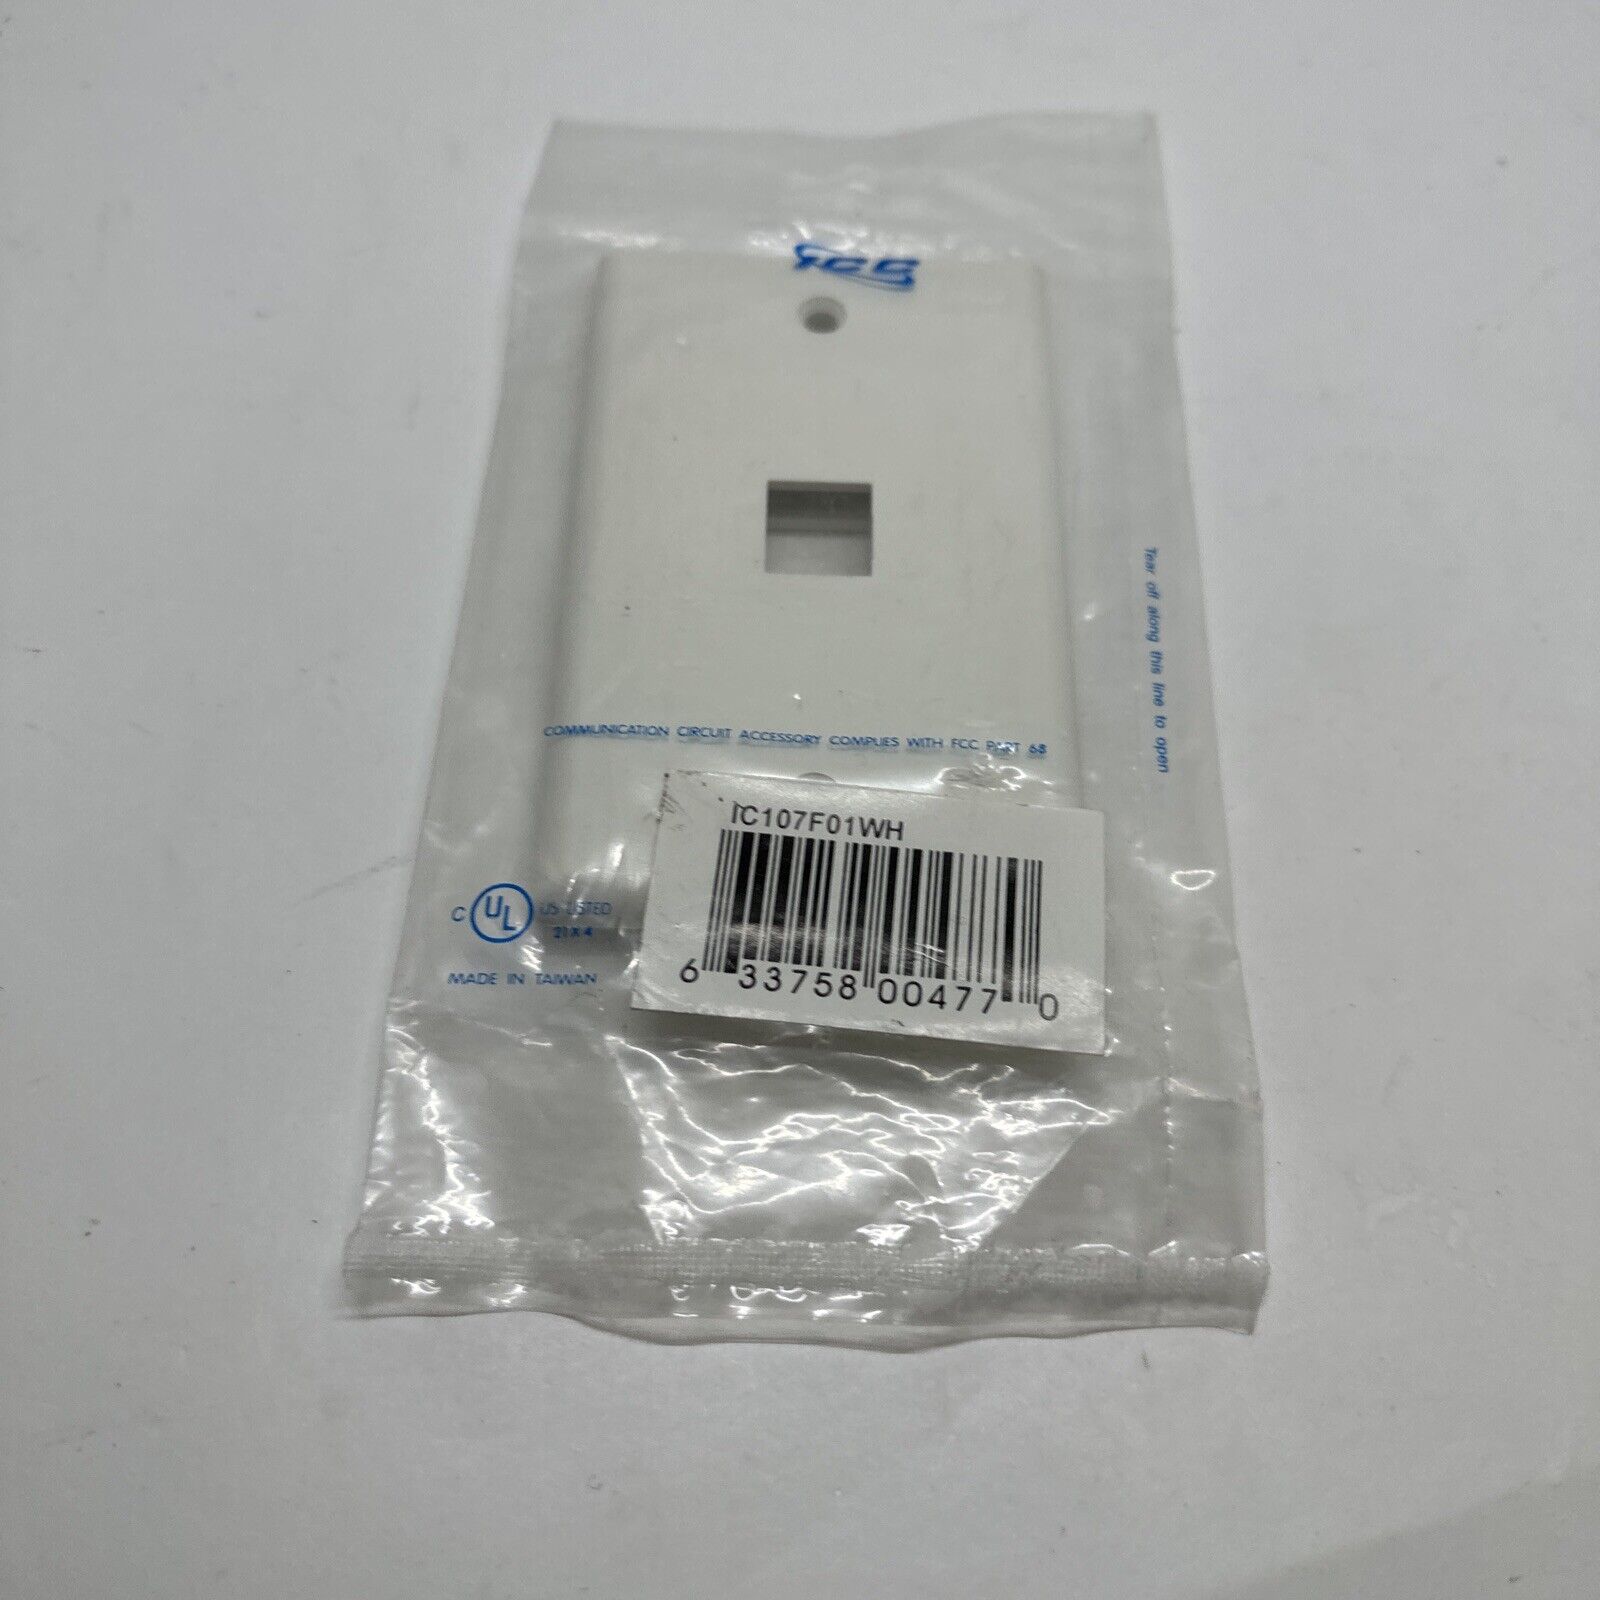 Icc IC107F01WH - 1Port Face White FACE-1-WH UPC 633758004770 - RA40